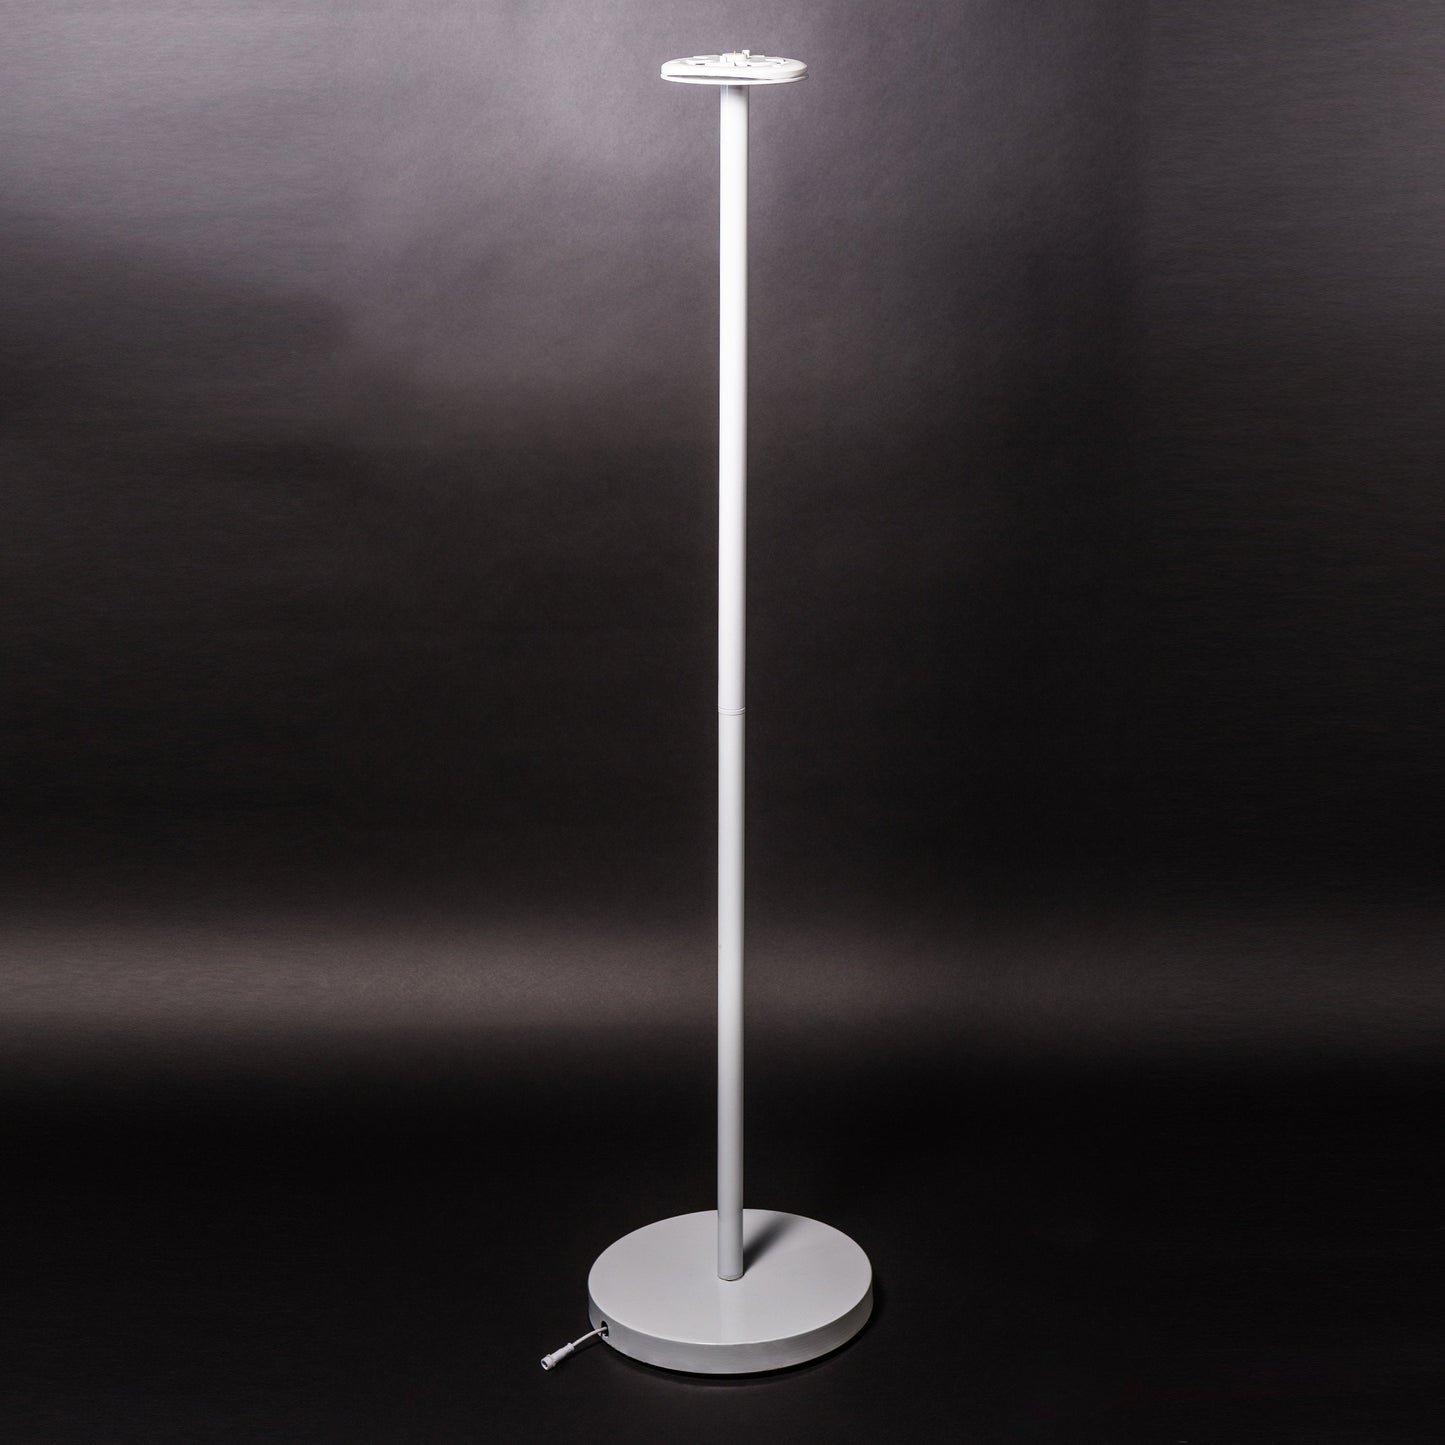 Ball Outdoor Bluetooth LED Lamp